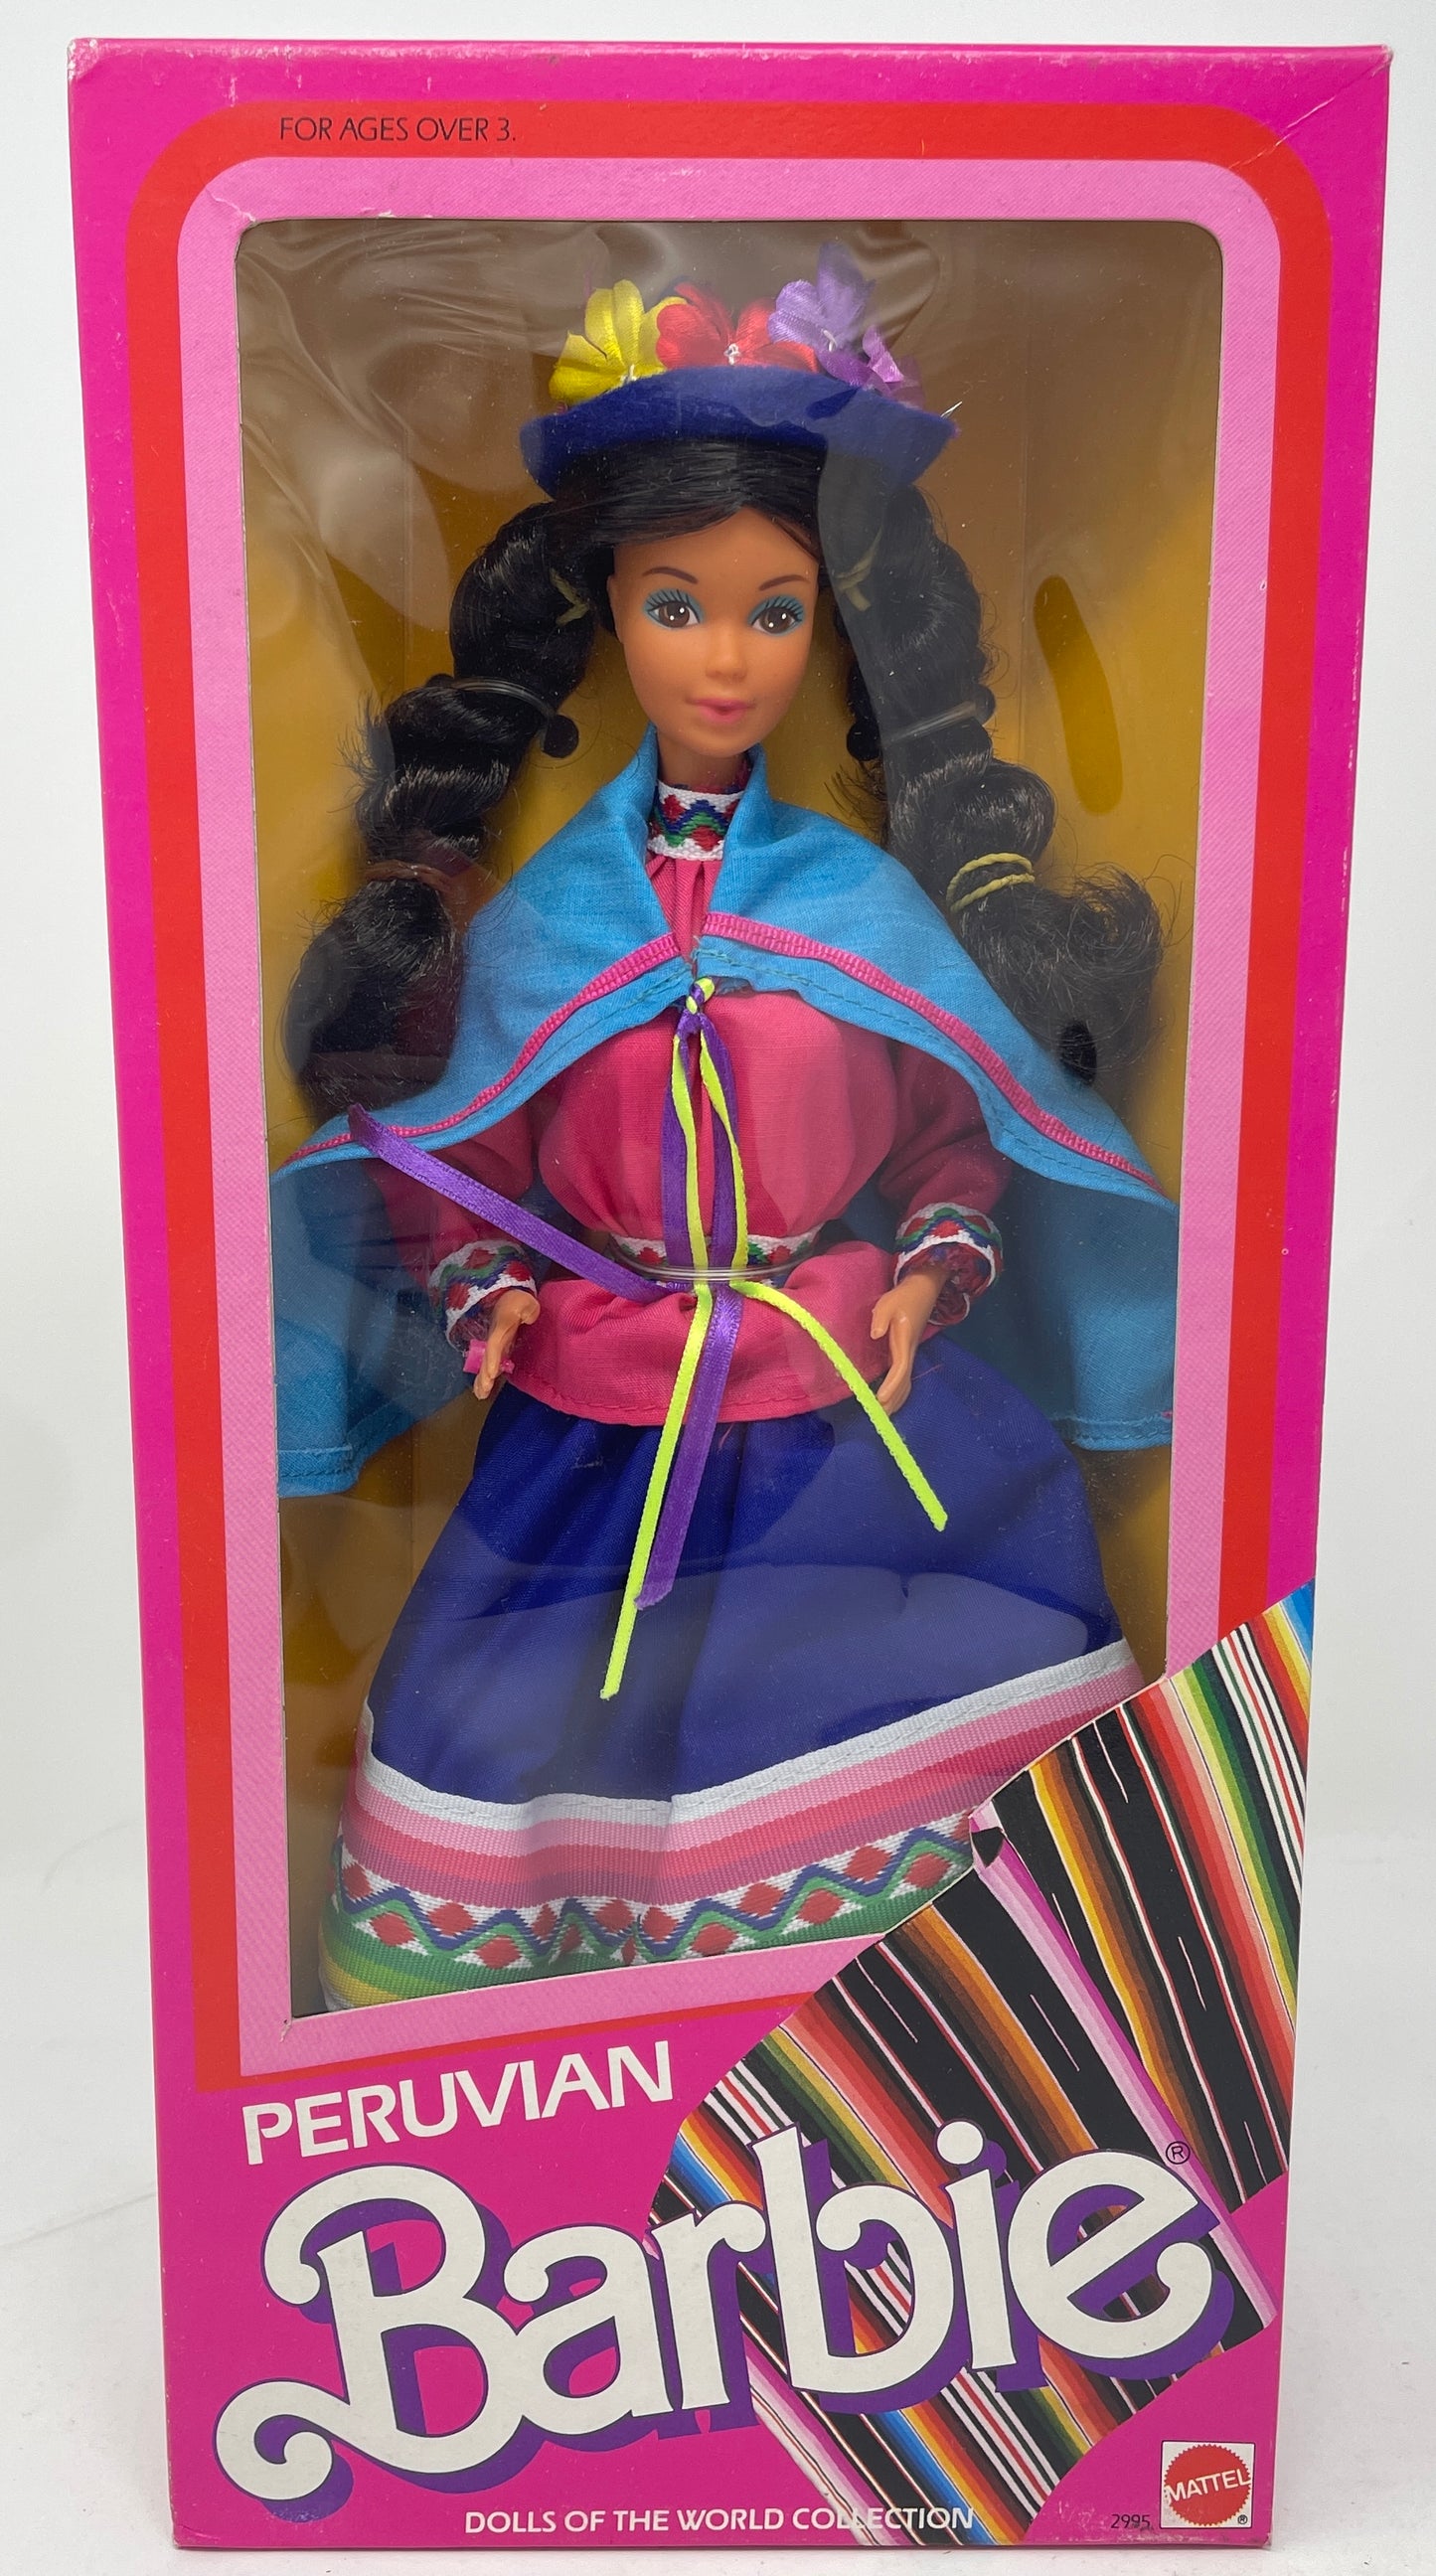 PERUVIAN BARBIE - DOLLS OF THE WORLD COLLECTION - SPECIAL EDITION - #2995 - MATTEL 1985